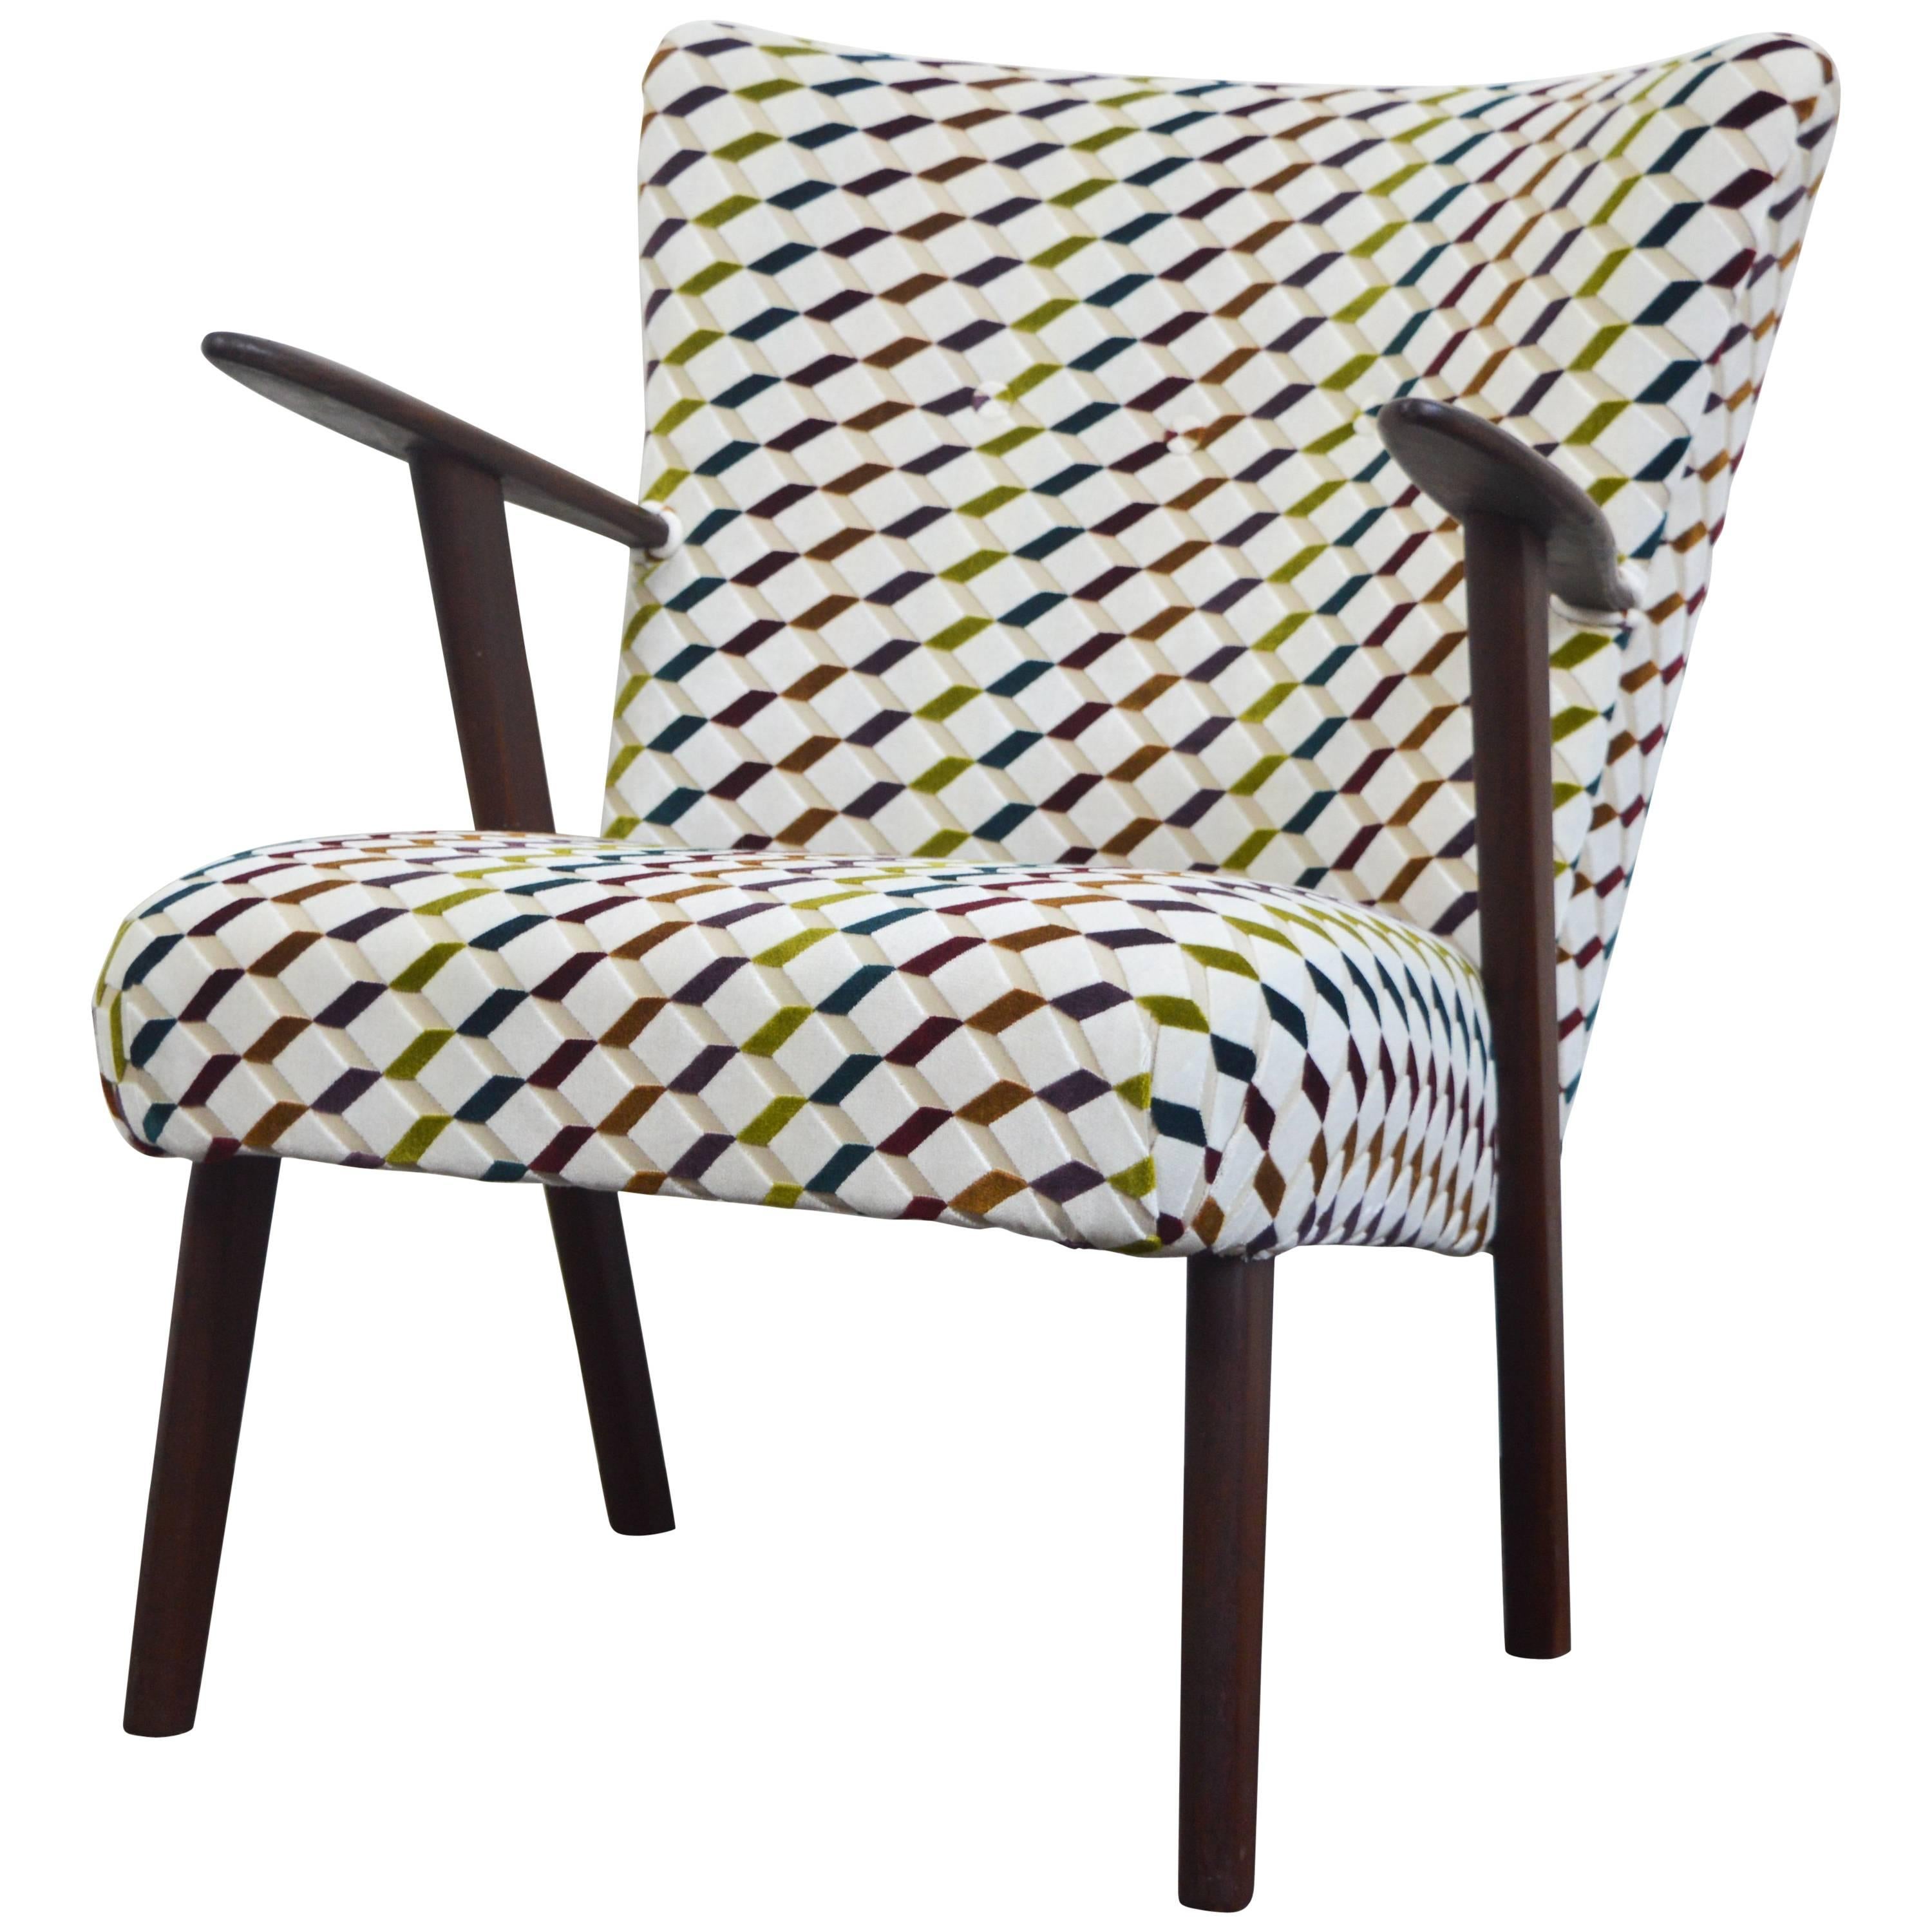 Vintage Re-Upholstered Club Chair, Denmark, 1960s For Sale